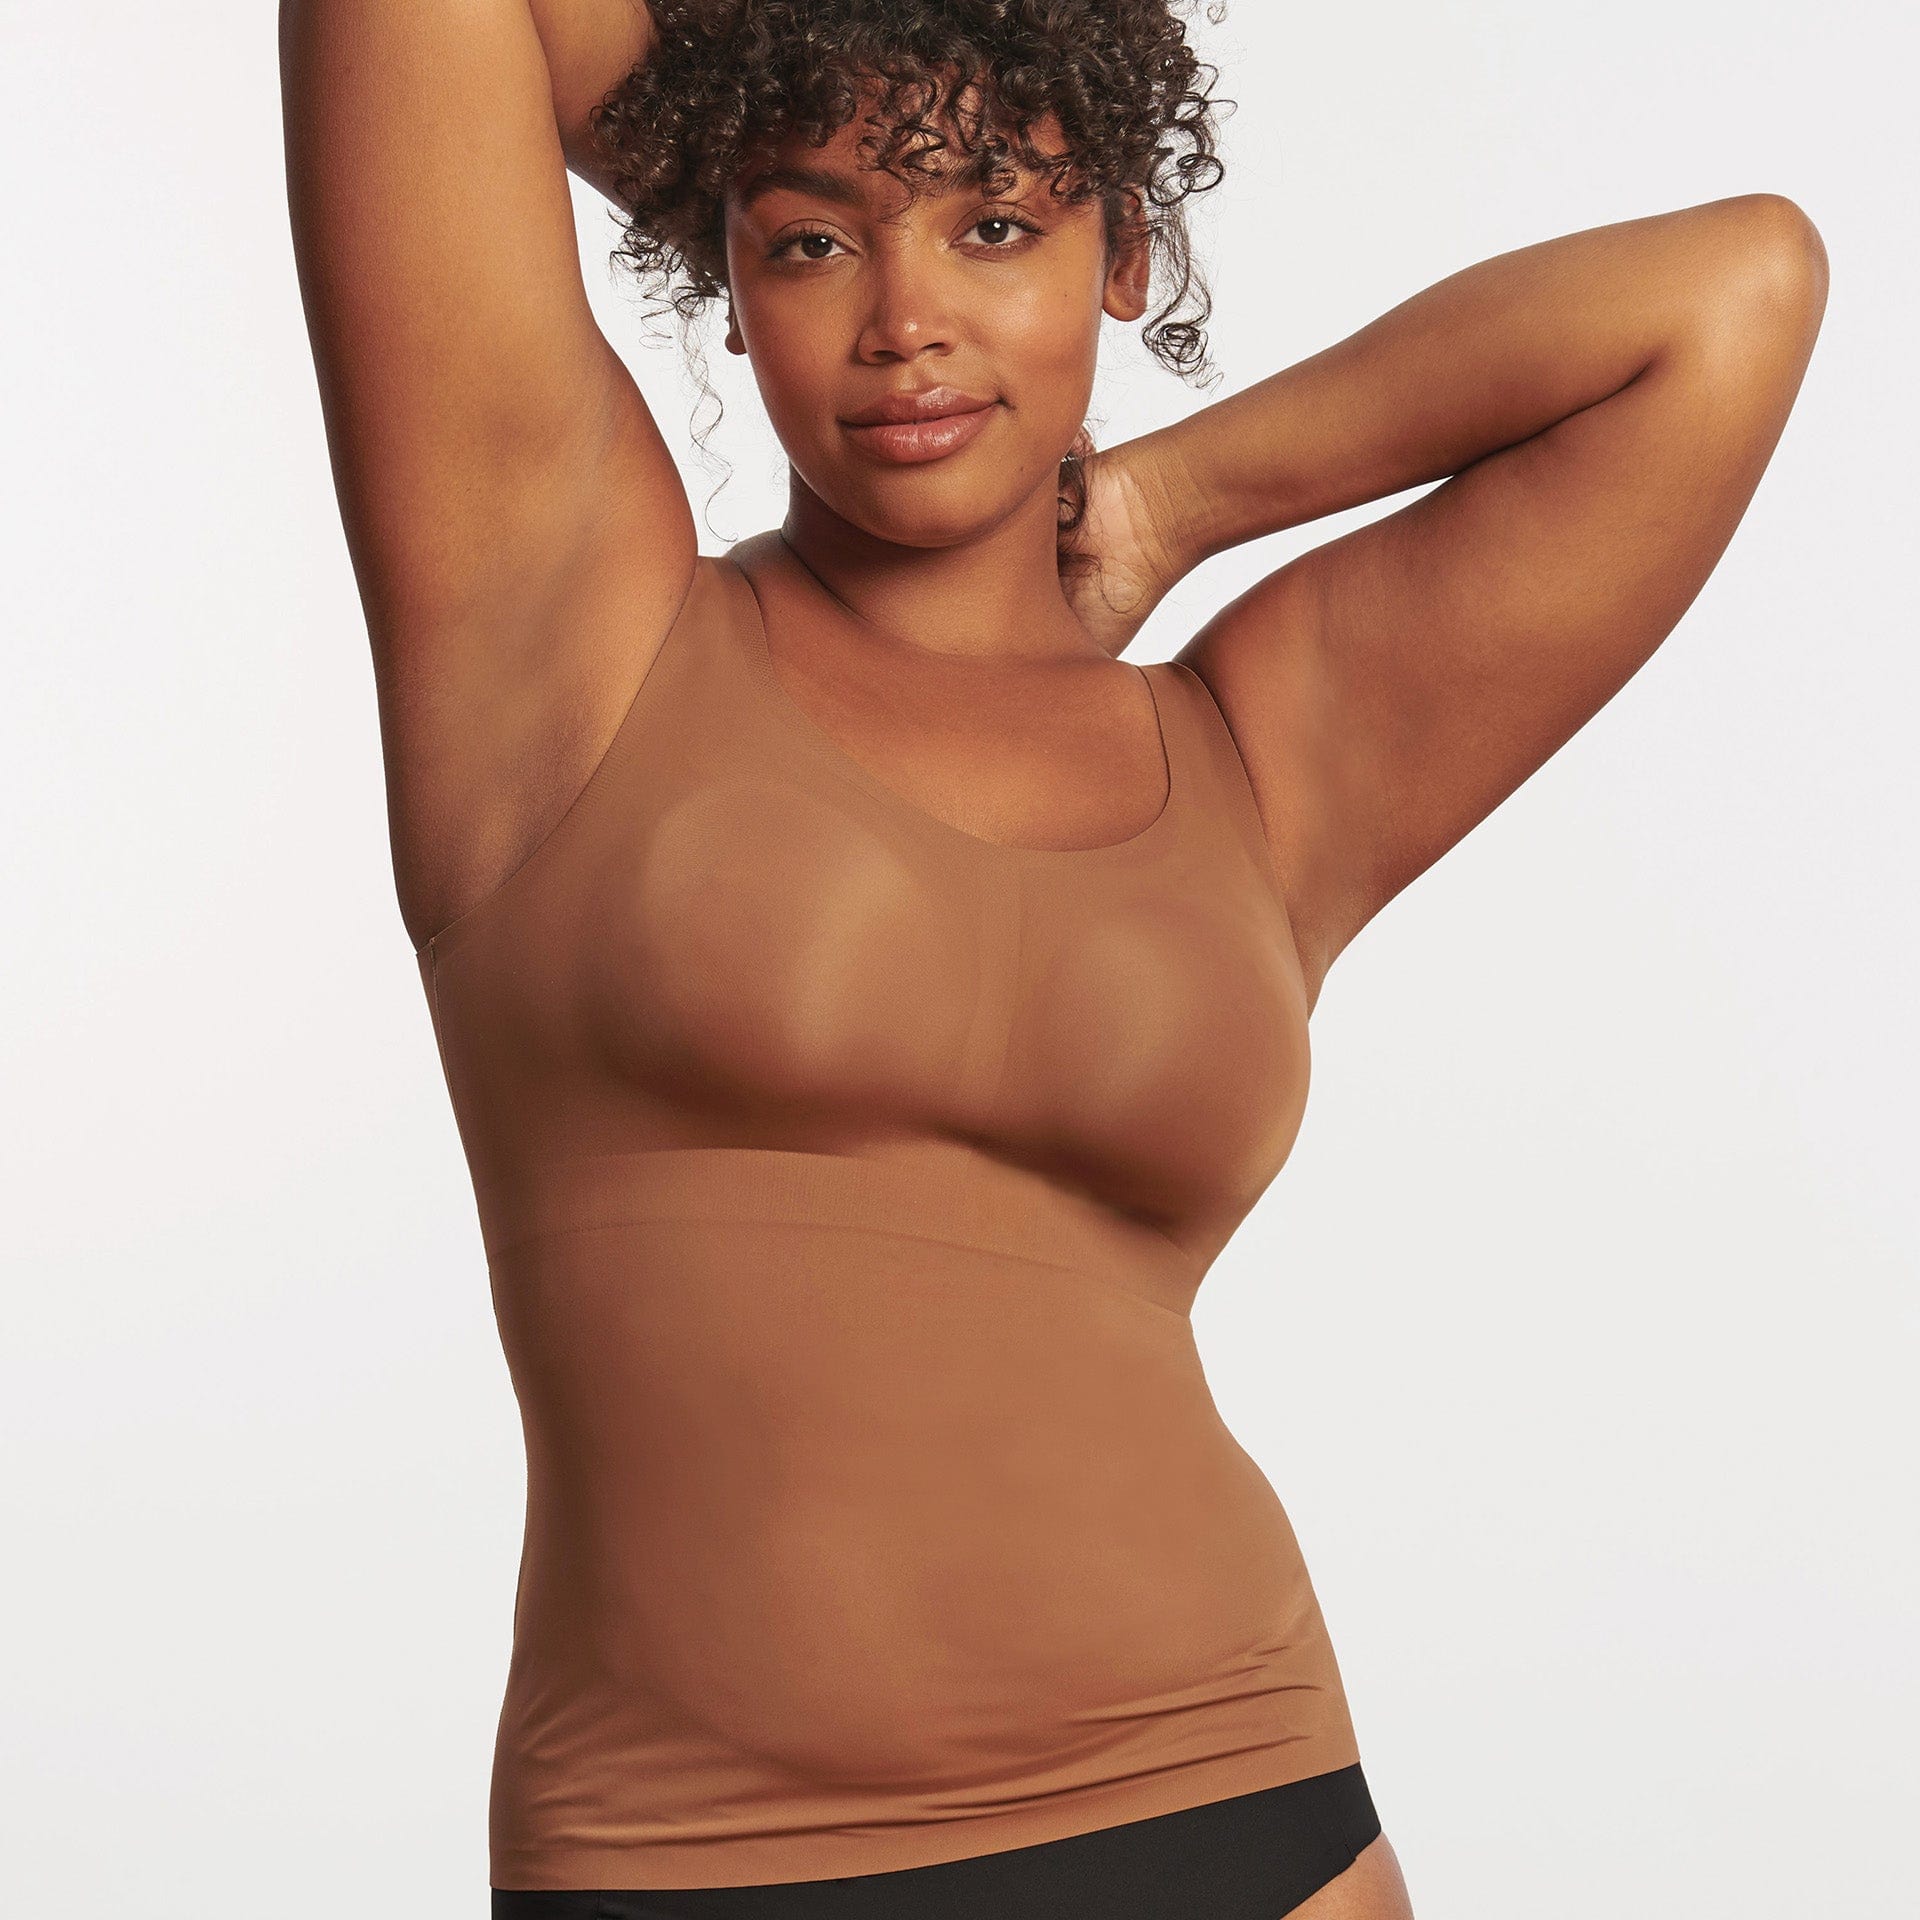 All Color: Clay | built in support tank cami nude brown